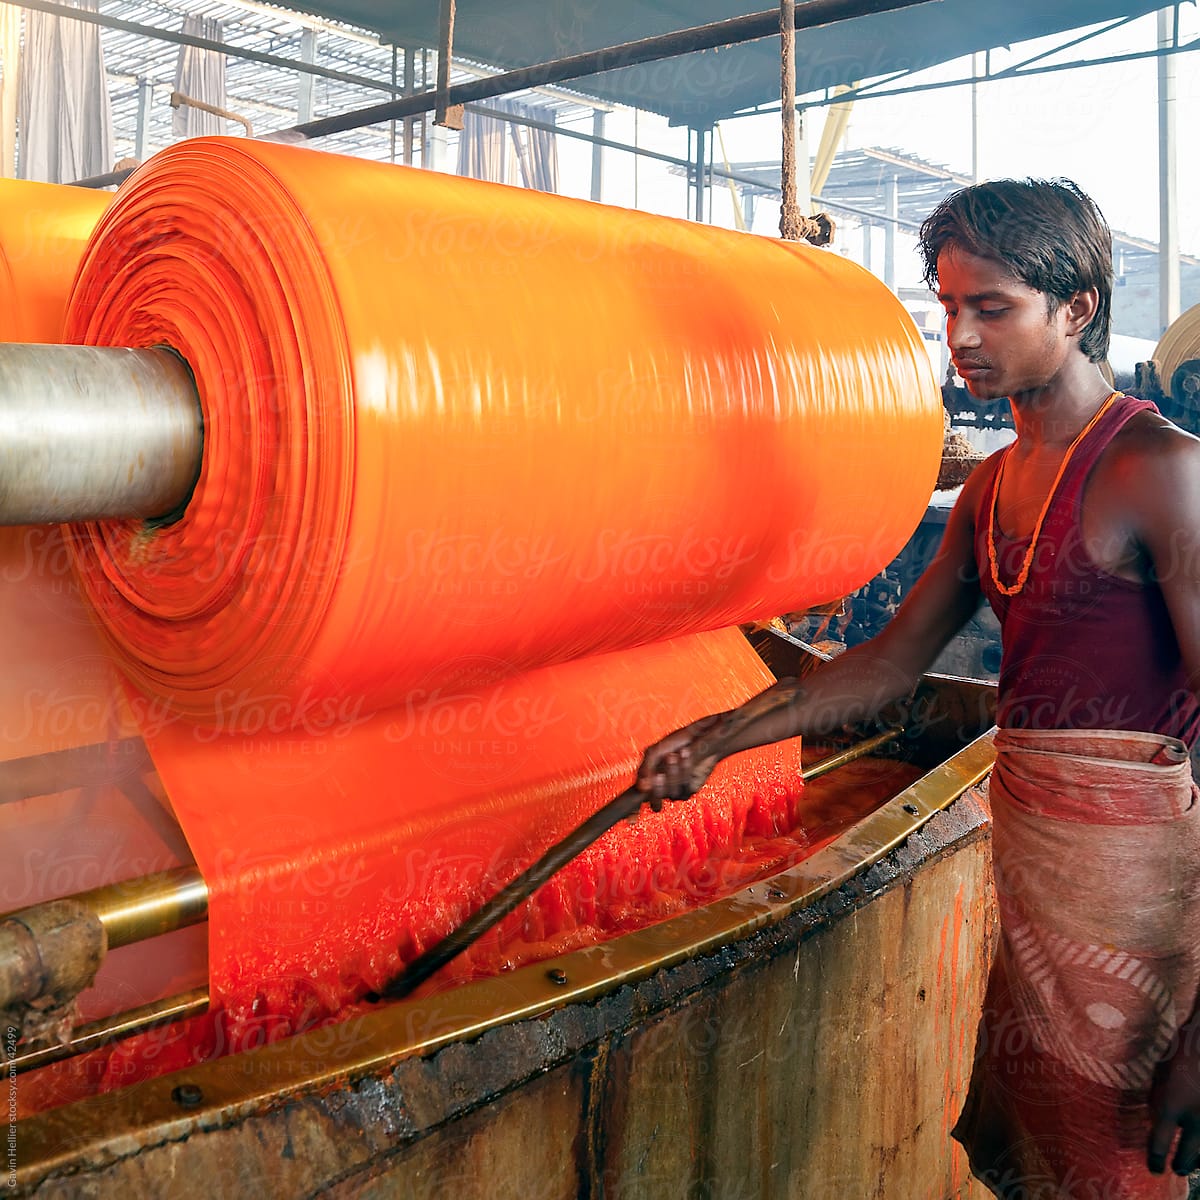 Portrait of a factory worker, Newly dyed fabric being washed and rolled, Sari garment factory, Jaipur, Rajasthan, India